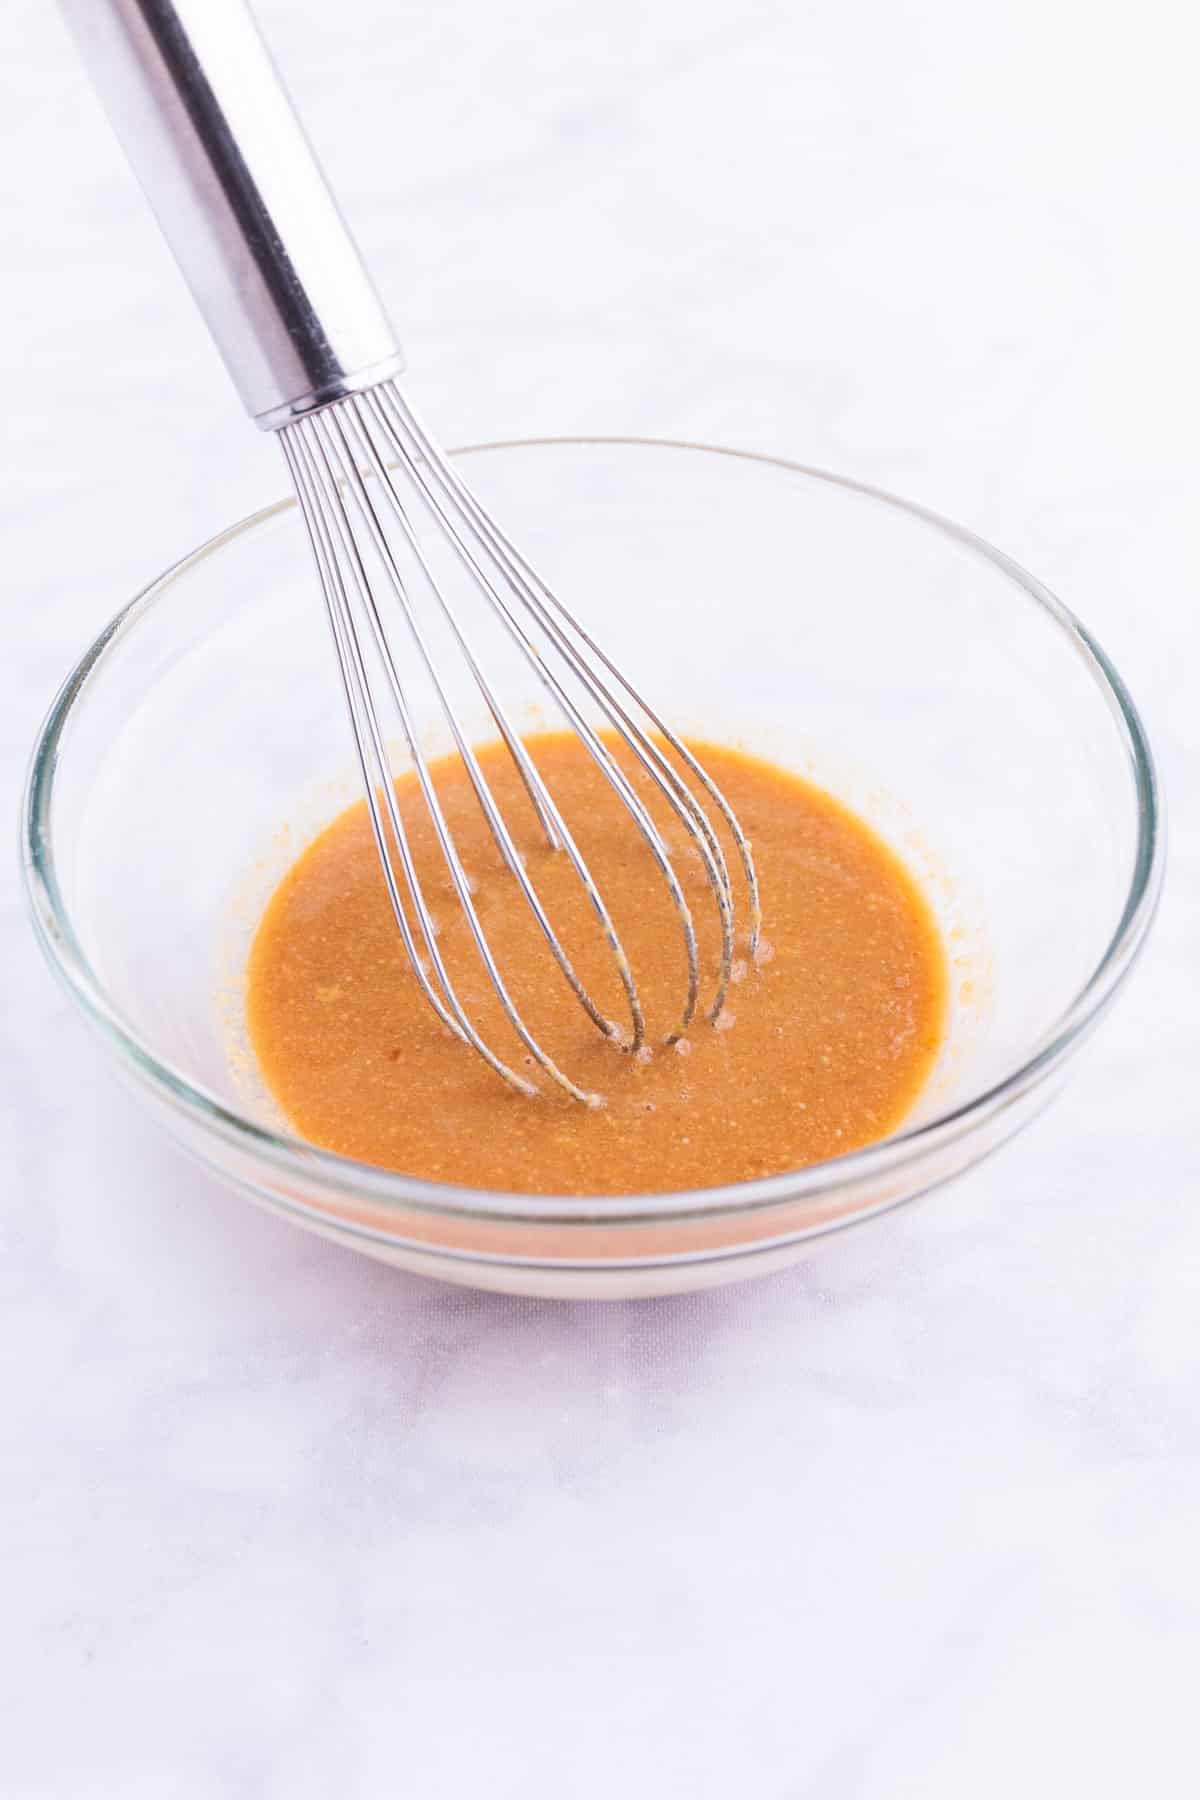 Peanut sauce is whisked together in a glass bowl.